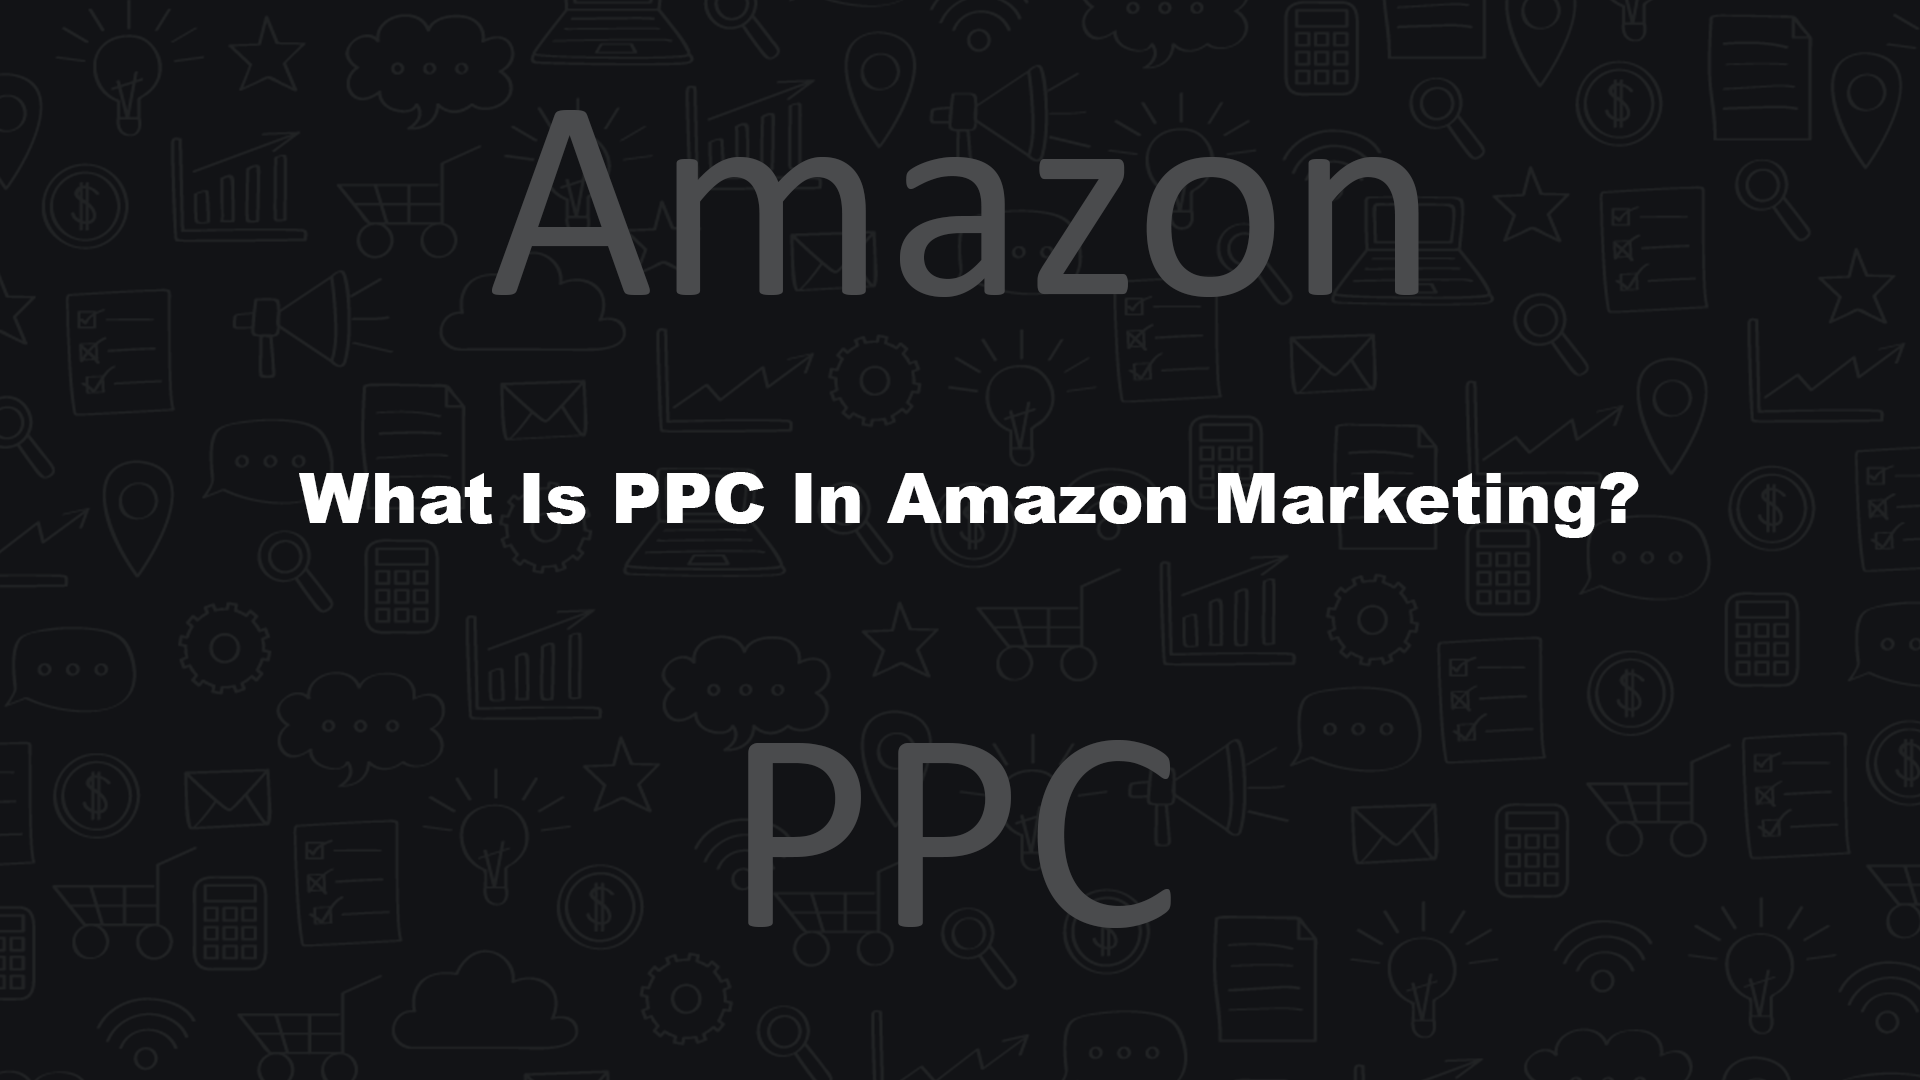 What Is PPC In Amazon Marketing?